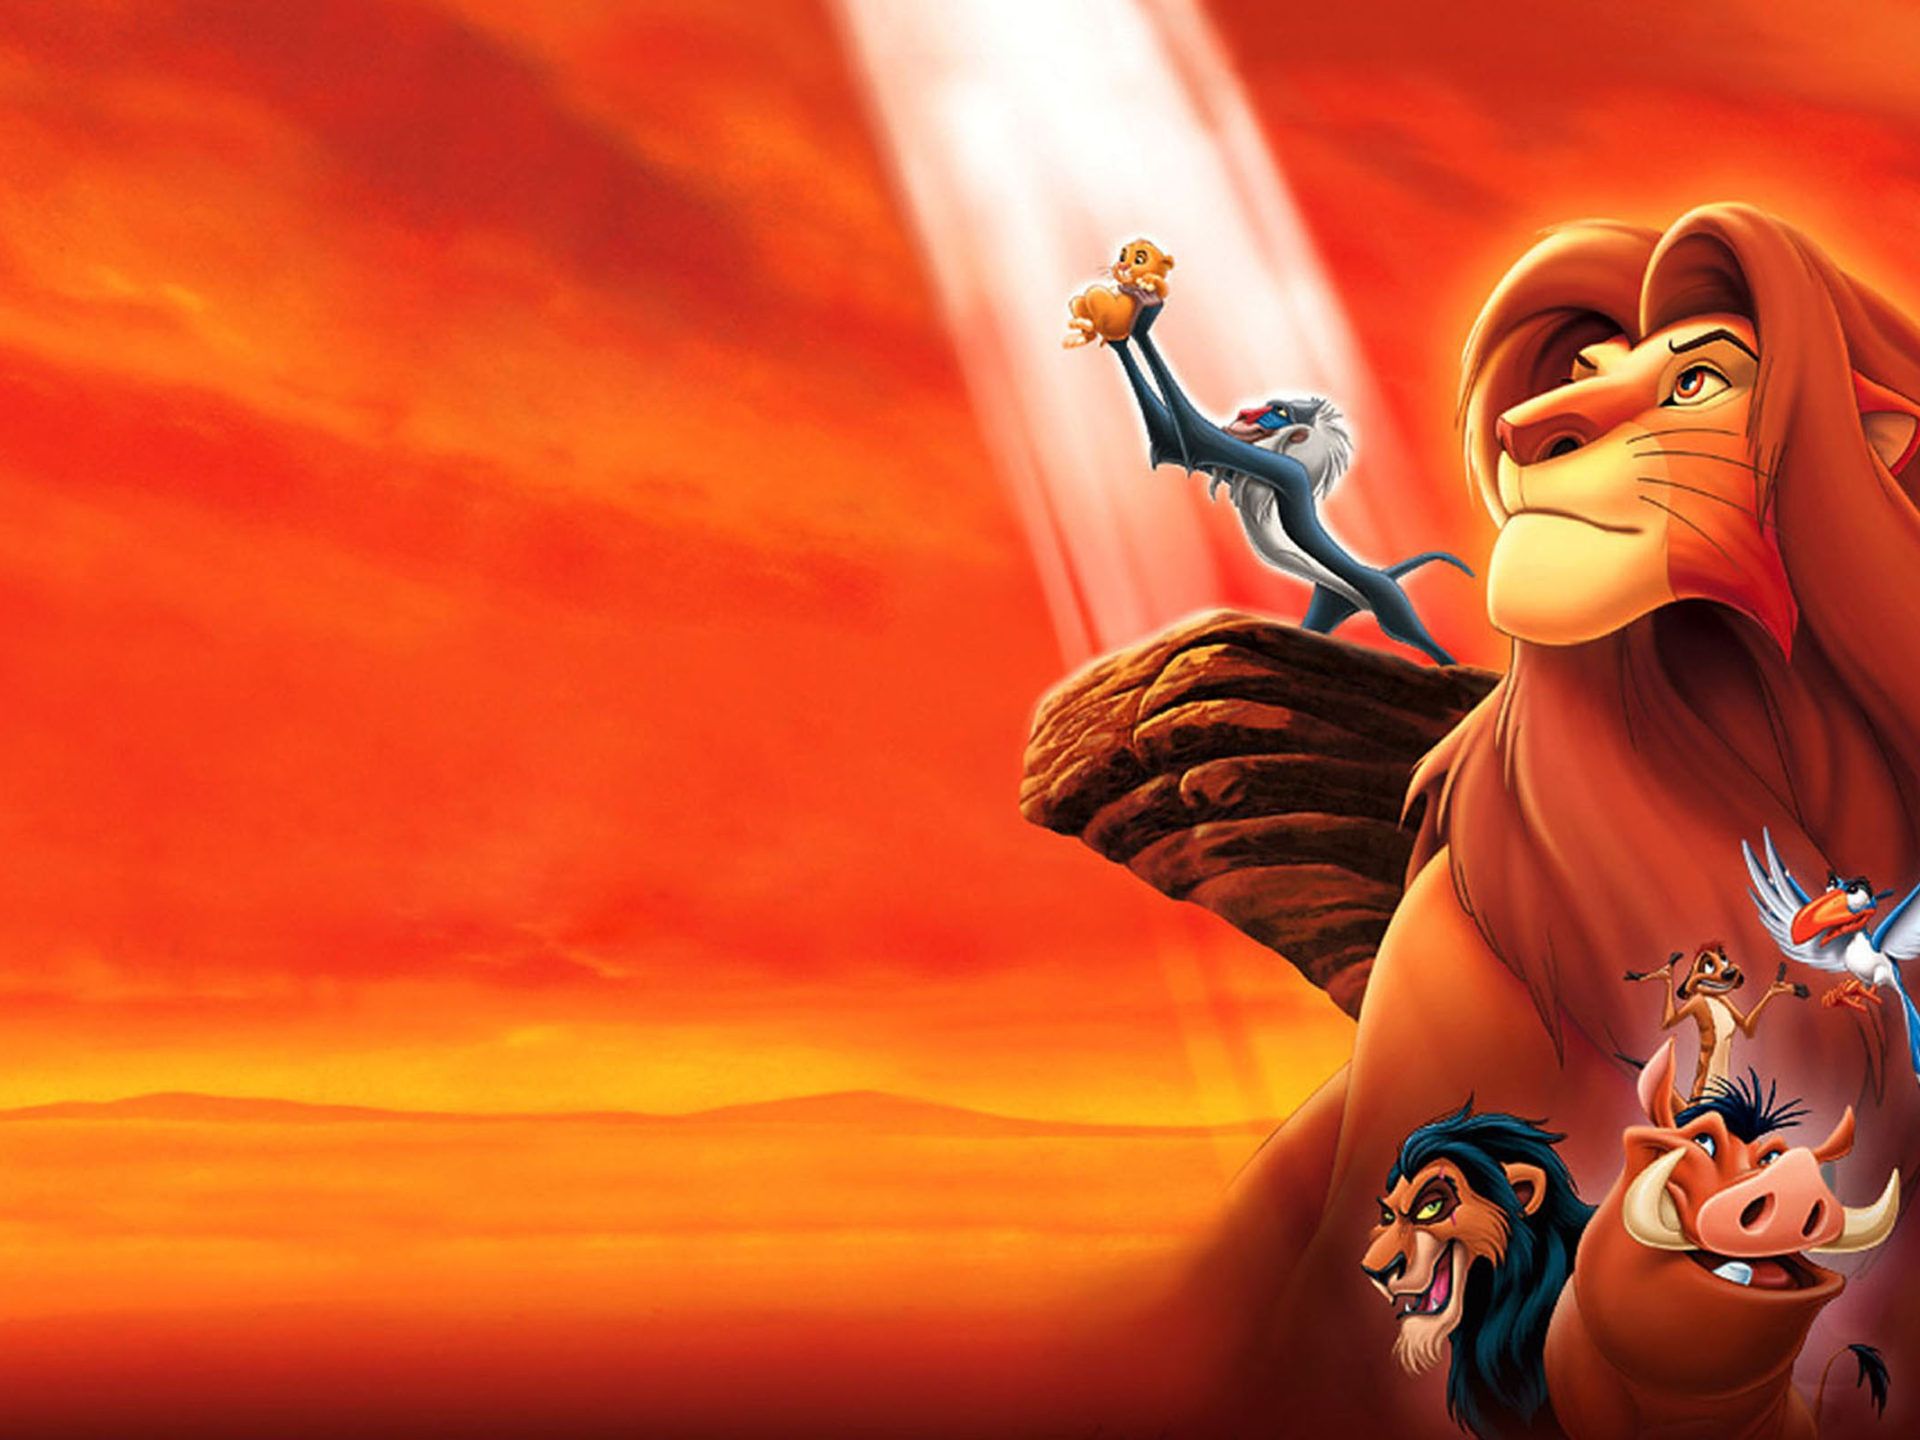 Simba, Timon, and Pumbaa from The Lion King wallpaper - The Lion King